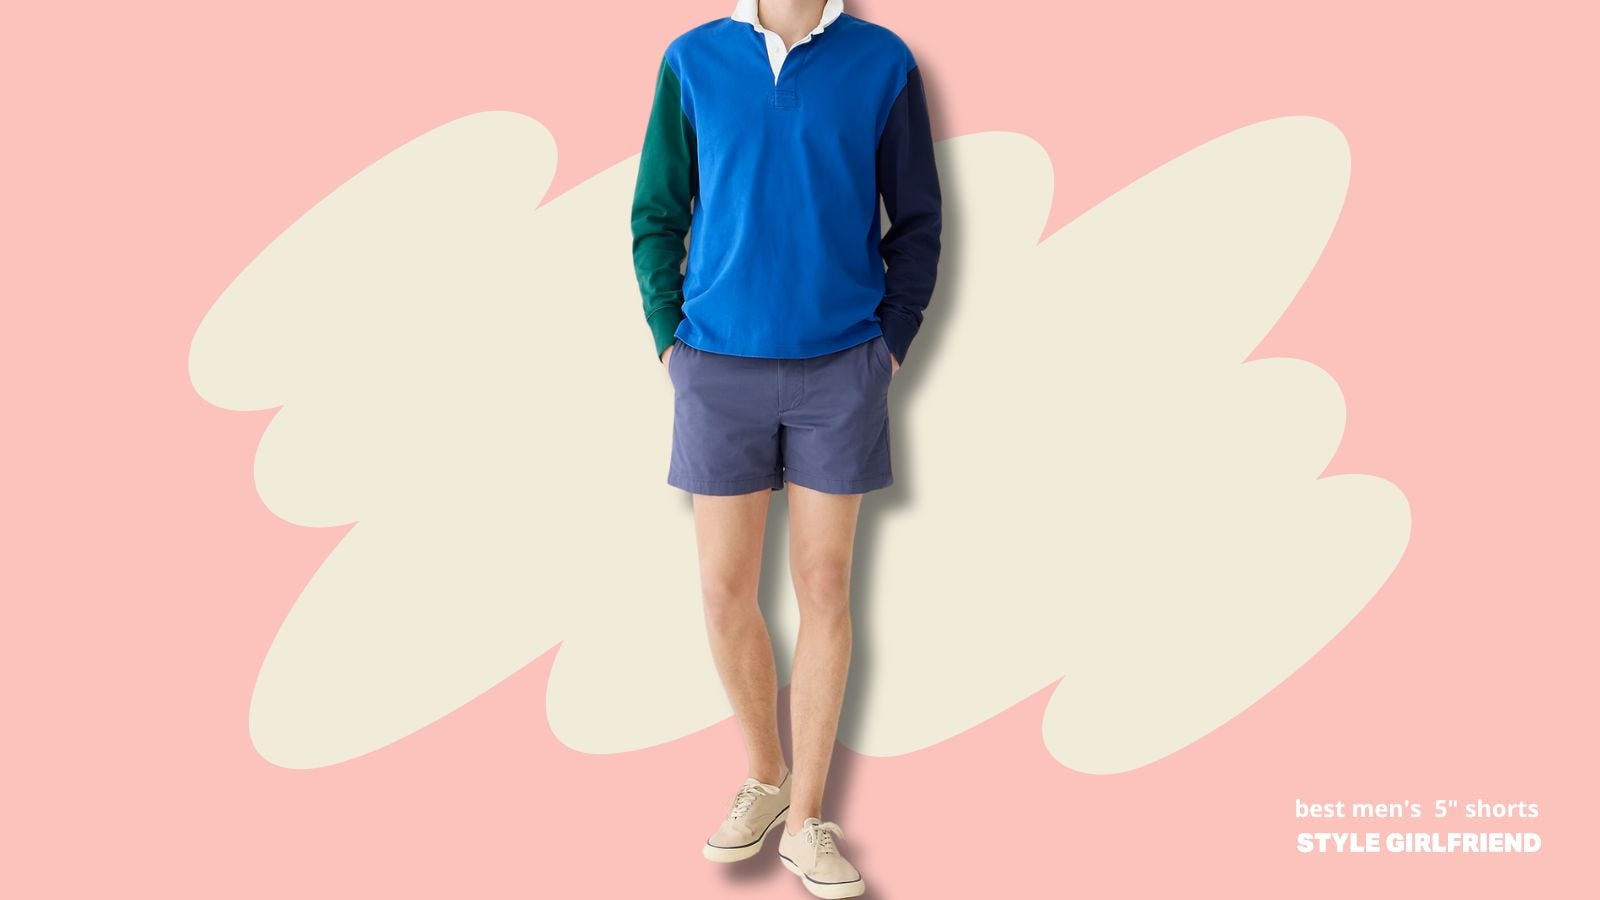 image of man from neck down, wearing a bright blue rugby shirt, with lighter blue shorts, and canvas sneakers against a pink background